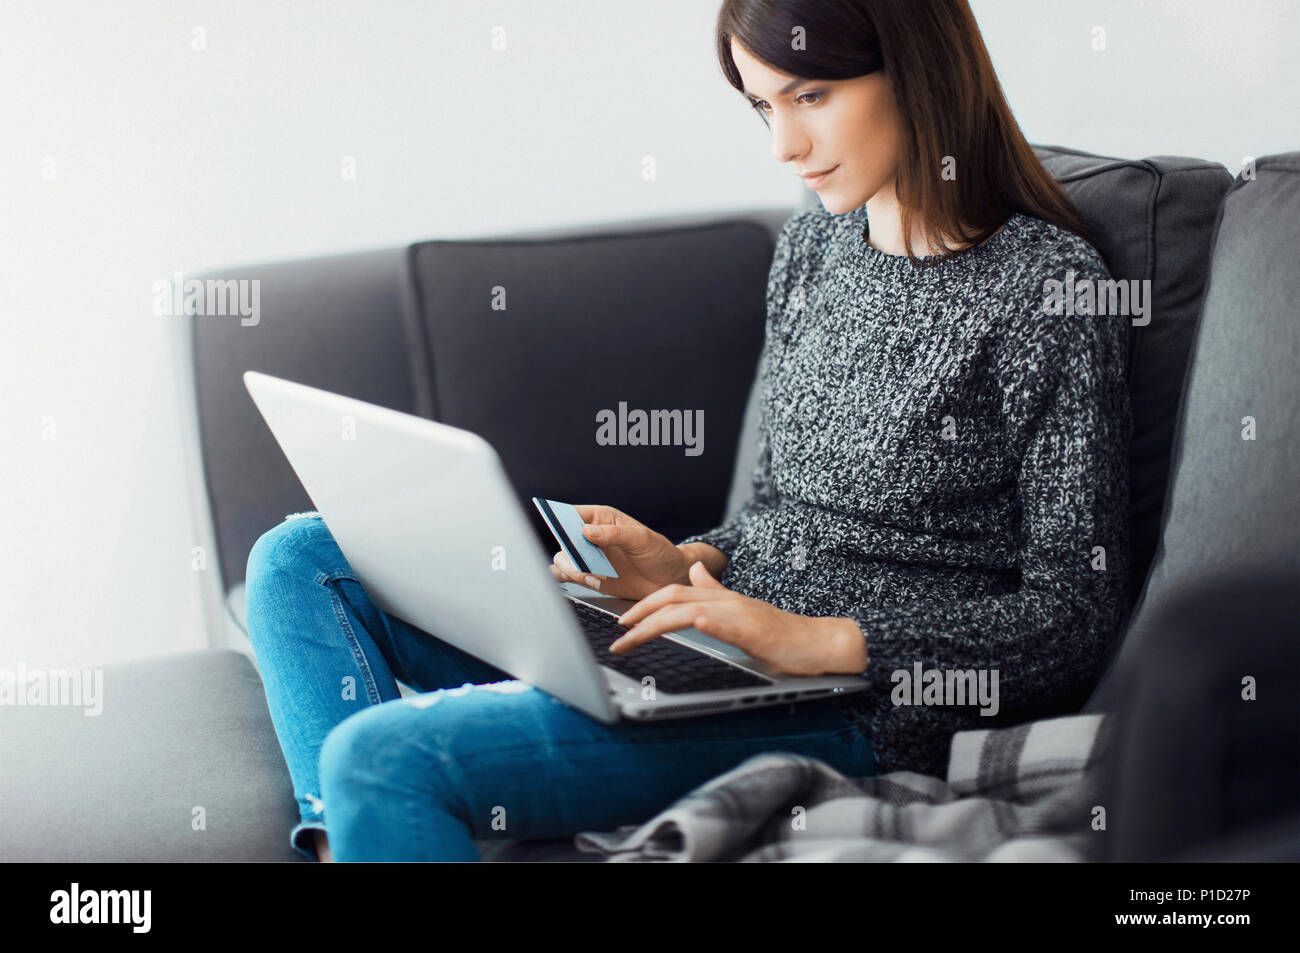 Woman work with pc and credit card, business Stock Photo